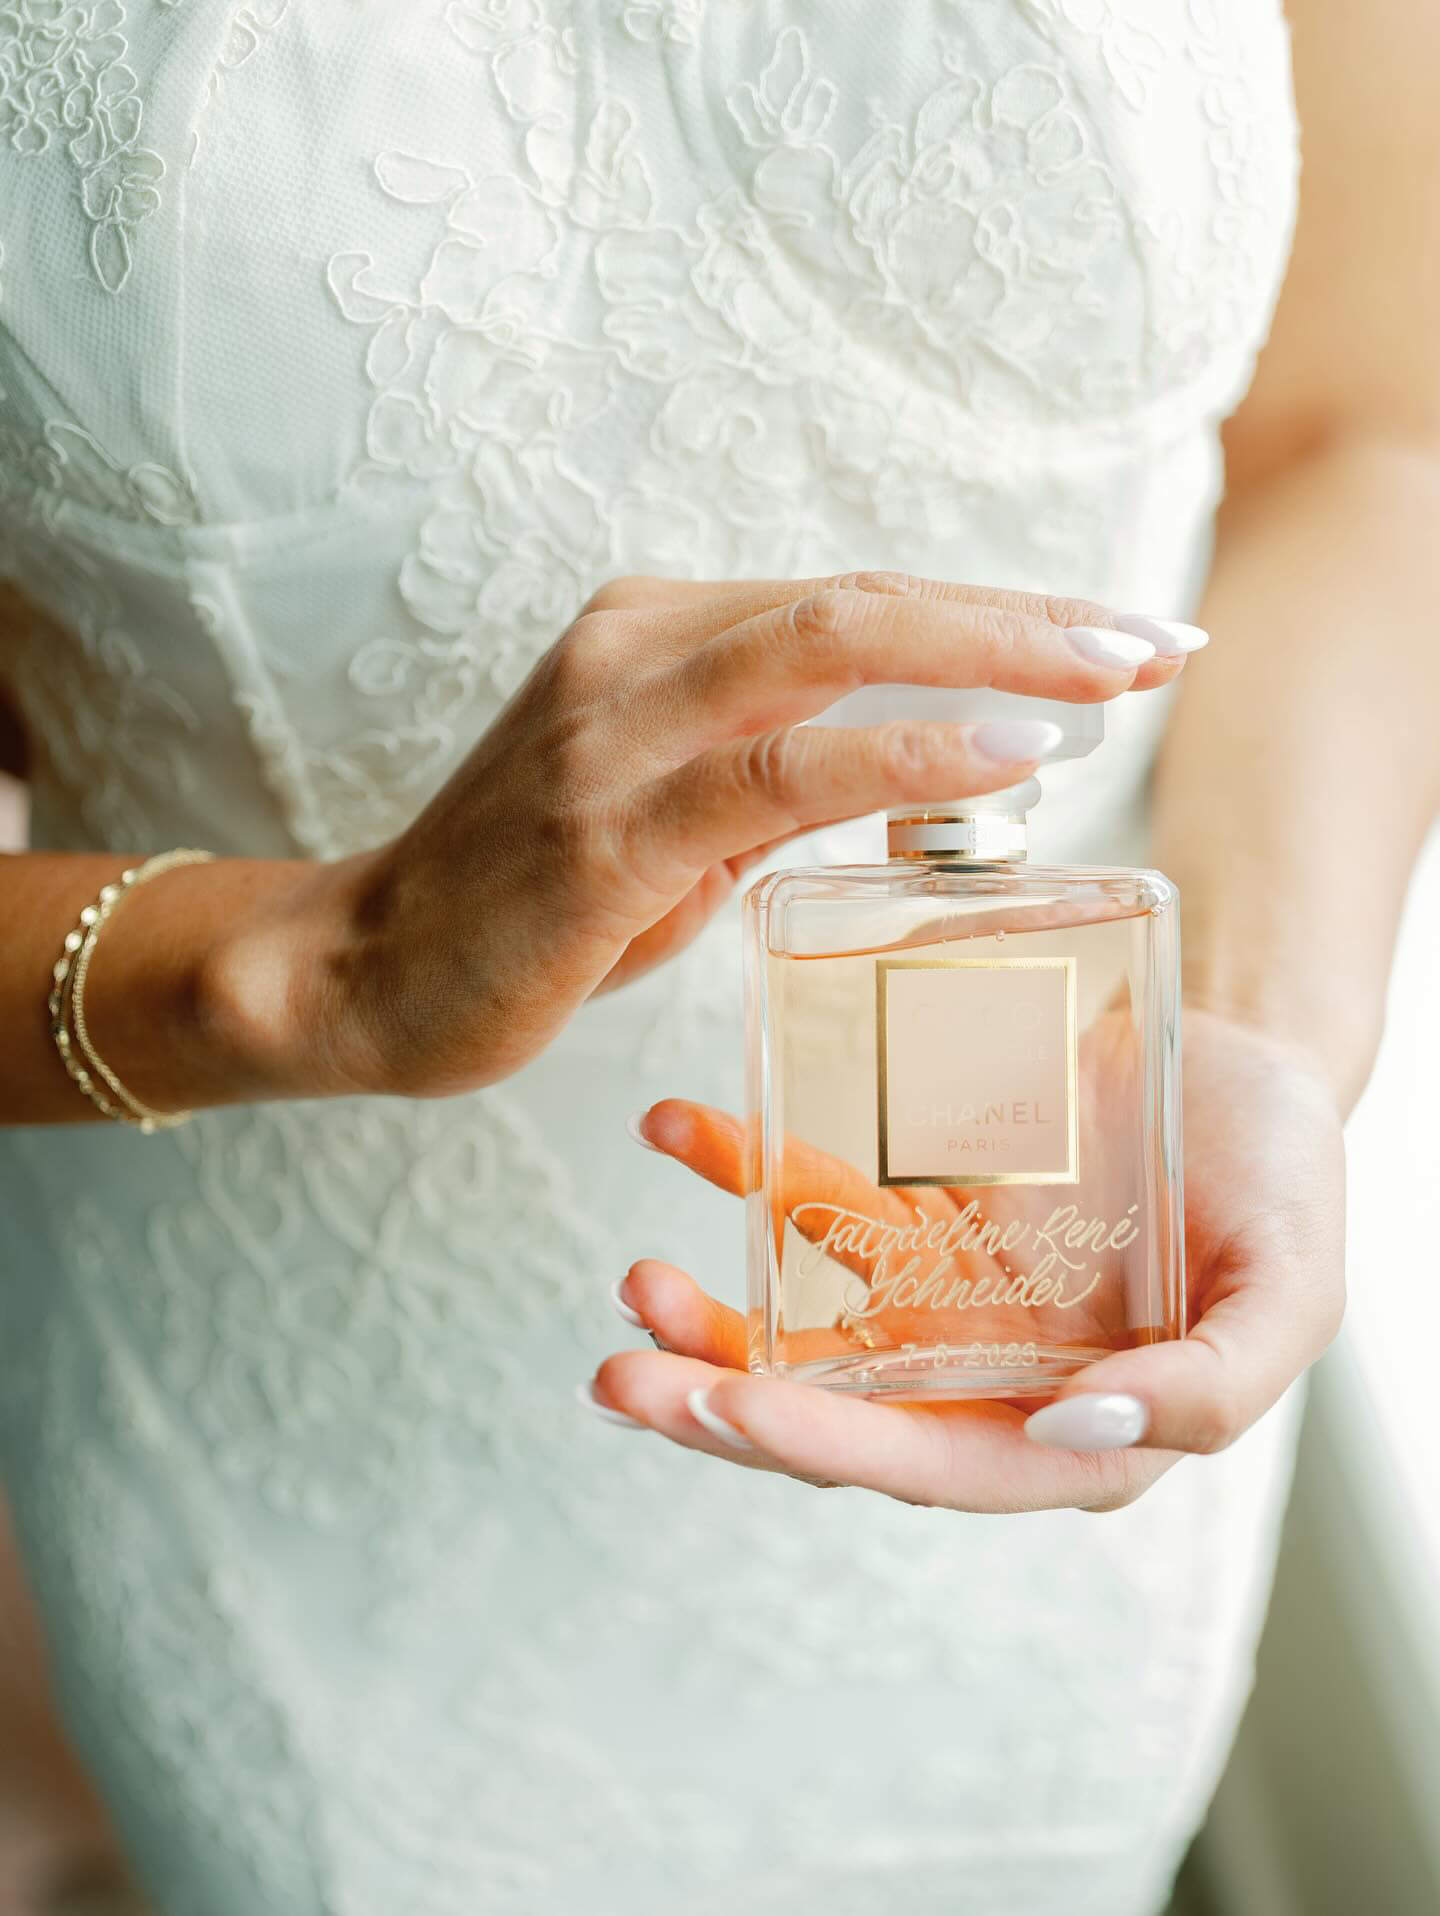 Bride holding her Chanel perfume engraved with her name.